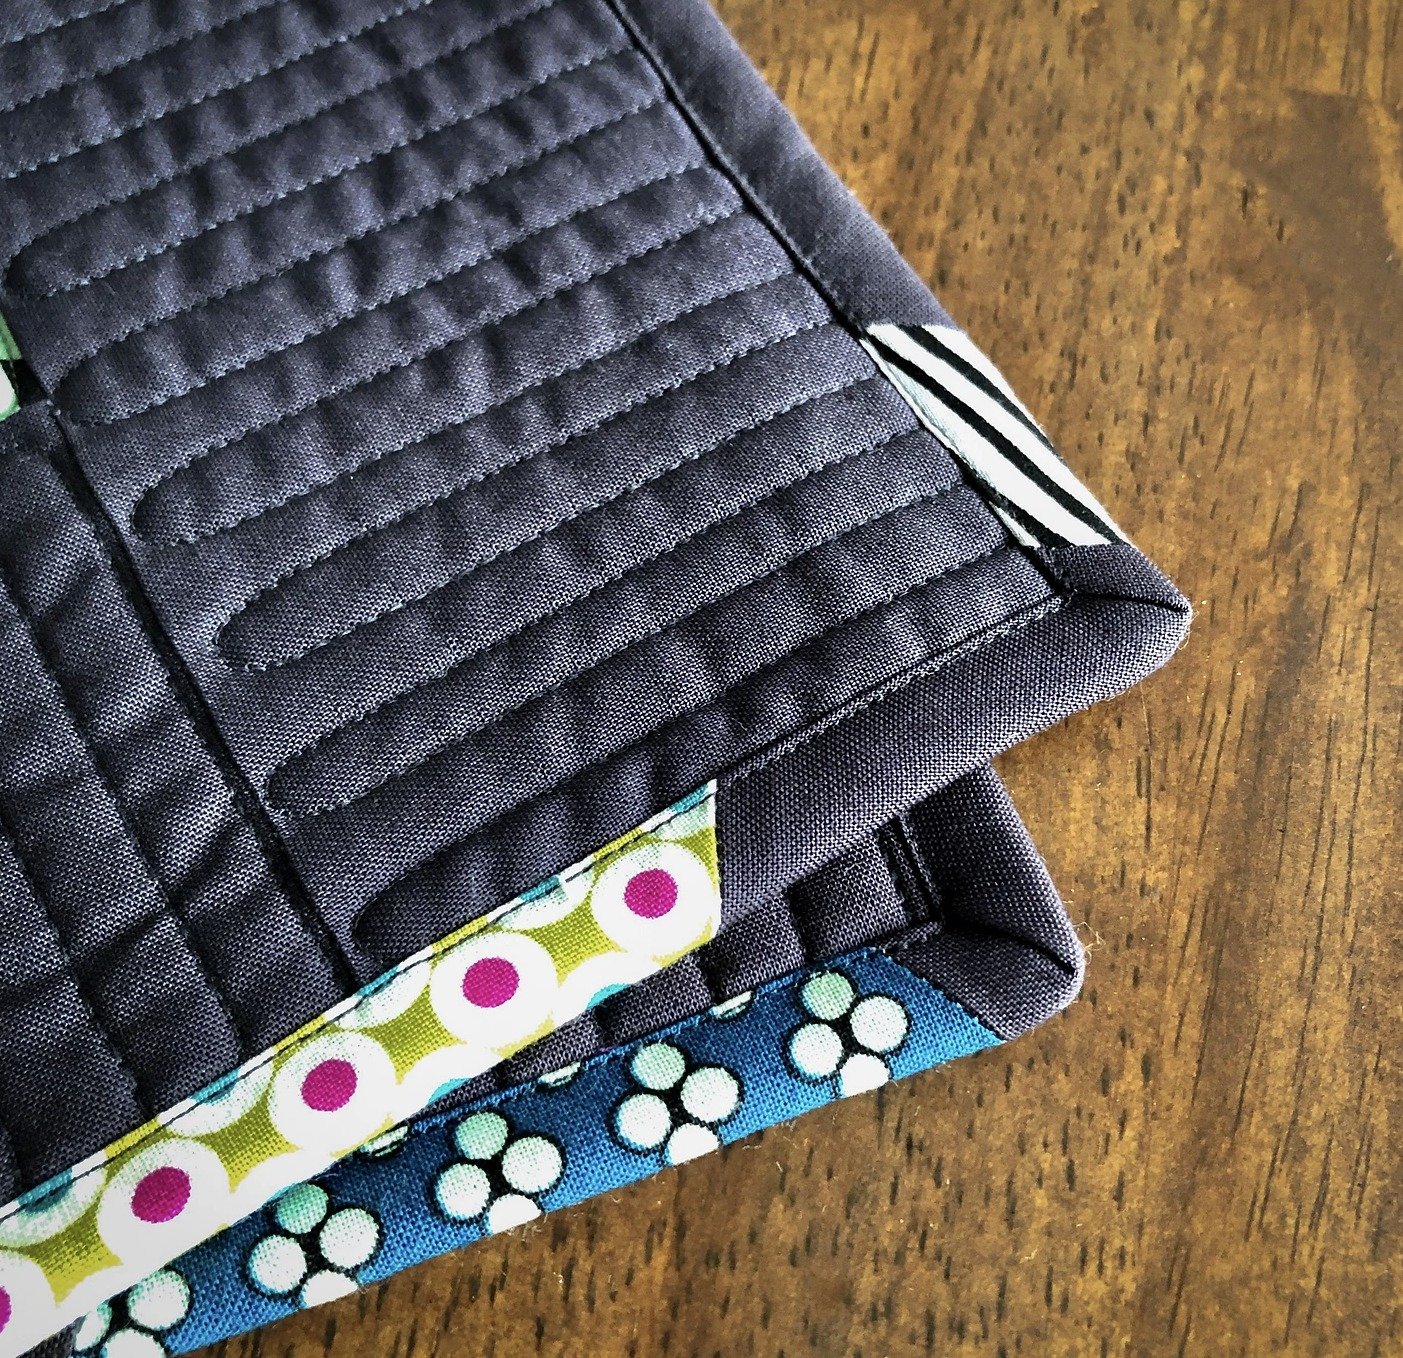 Your quilt binding and corners can make or break your quilt.  If you are looking for an award, I have witnessed many judges, whilst in the judging room, say, the quilt had everything going for it,  but the corner on the binding,  This tutorial by @ki